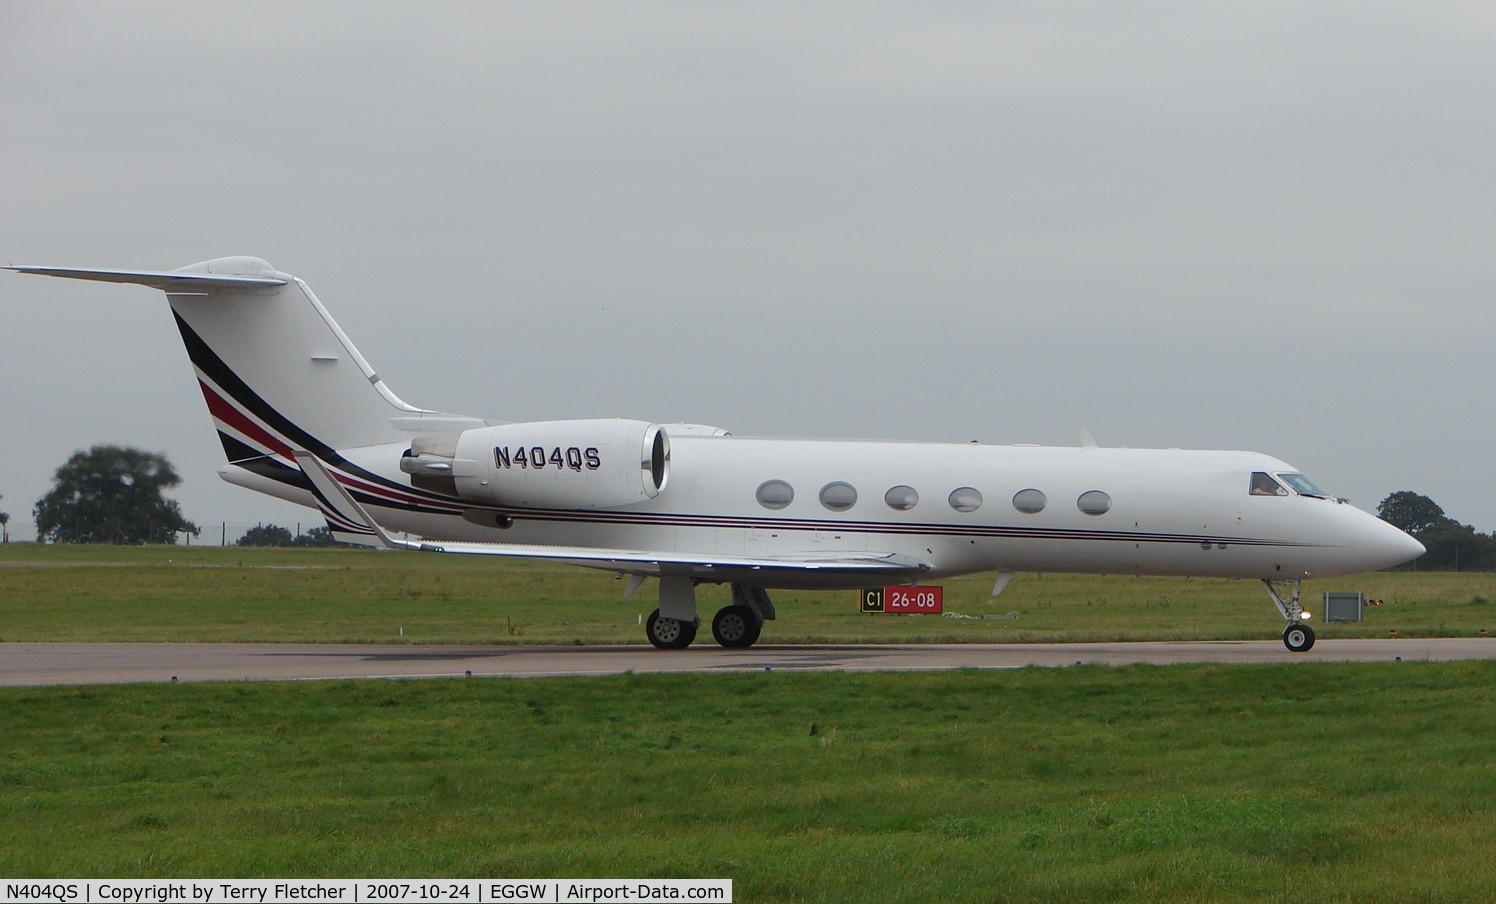 N404QS, 1996 Gulfstream Aerospace G-IV C/N 1304, on a busy day at Luton Airport (UK)